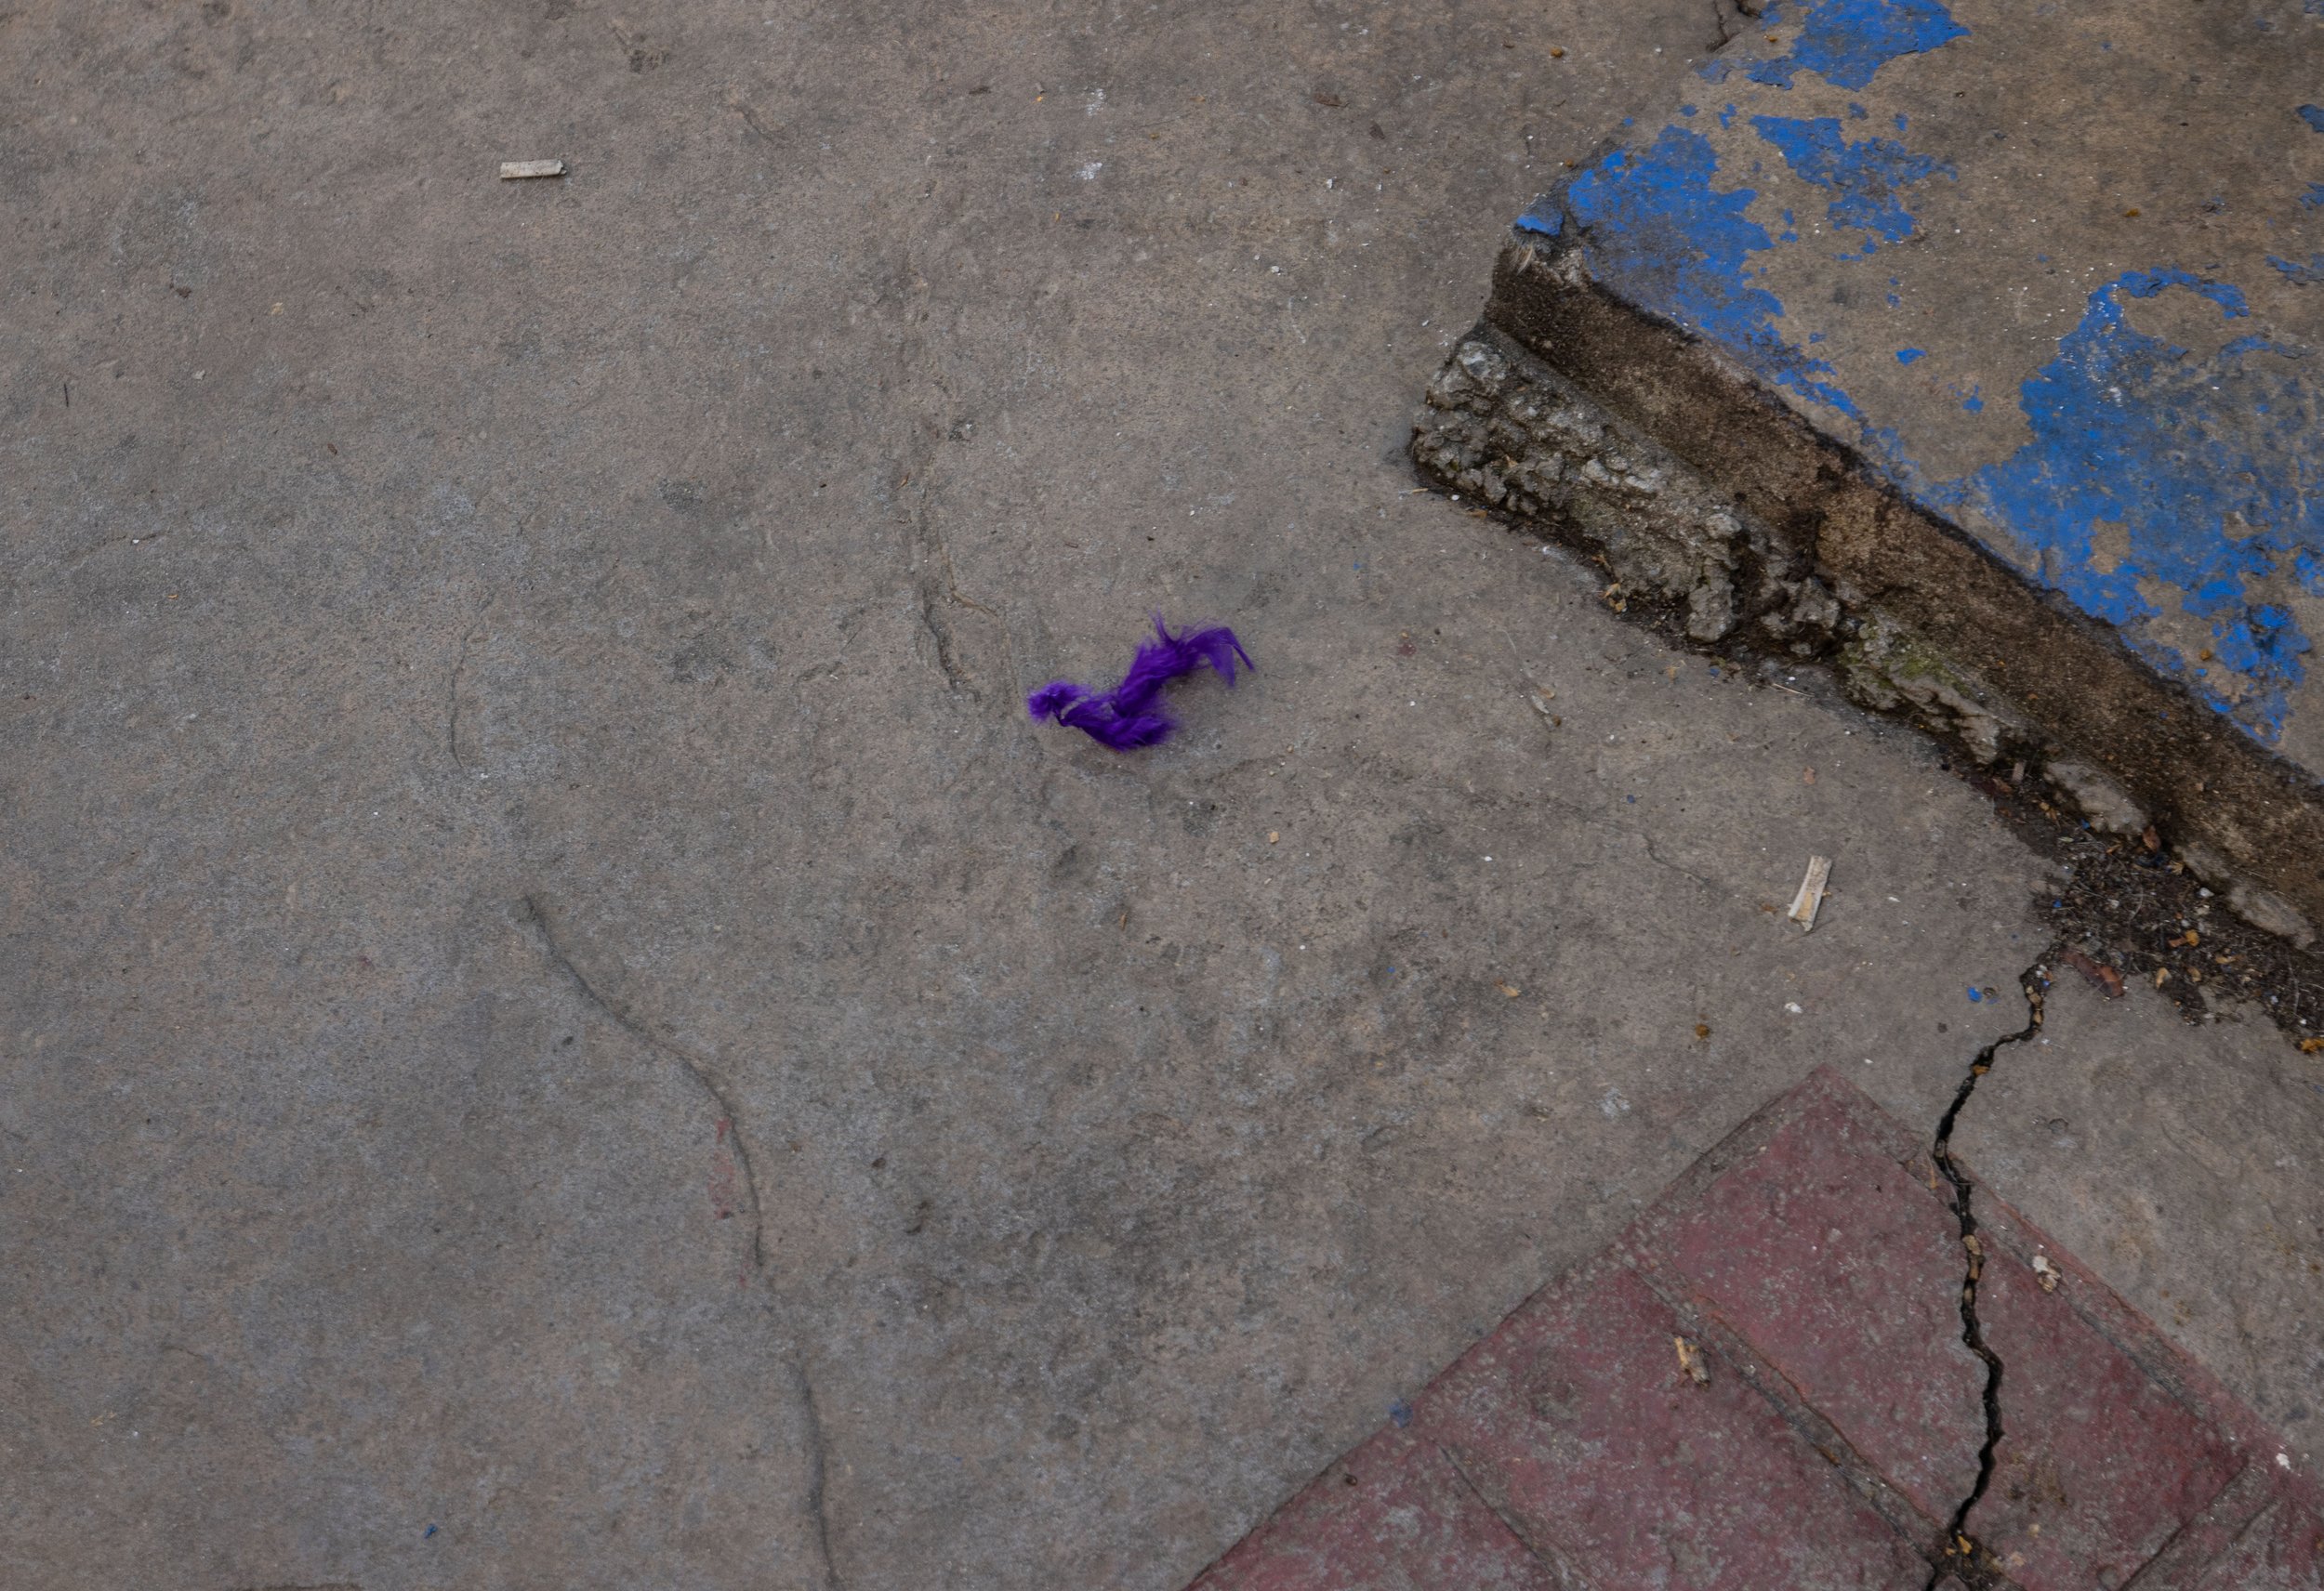  A purple feather remains on the sidewalk following an intense evening of protesting in Istanbul. The color represents women’s solidarity and was worn discreetly amongst women to demonstrate their support for the march. 